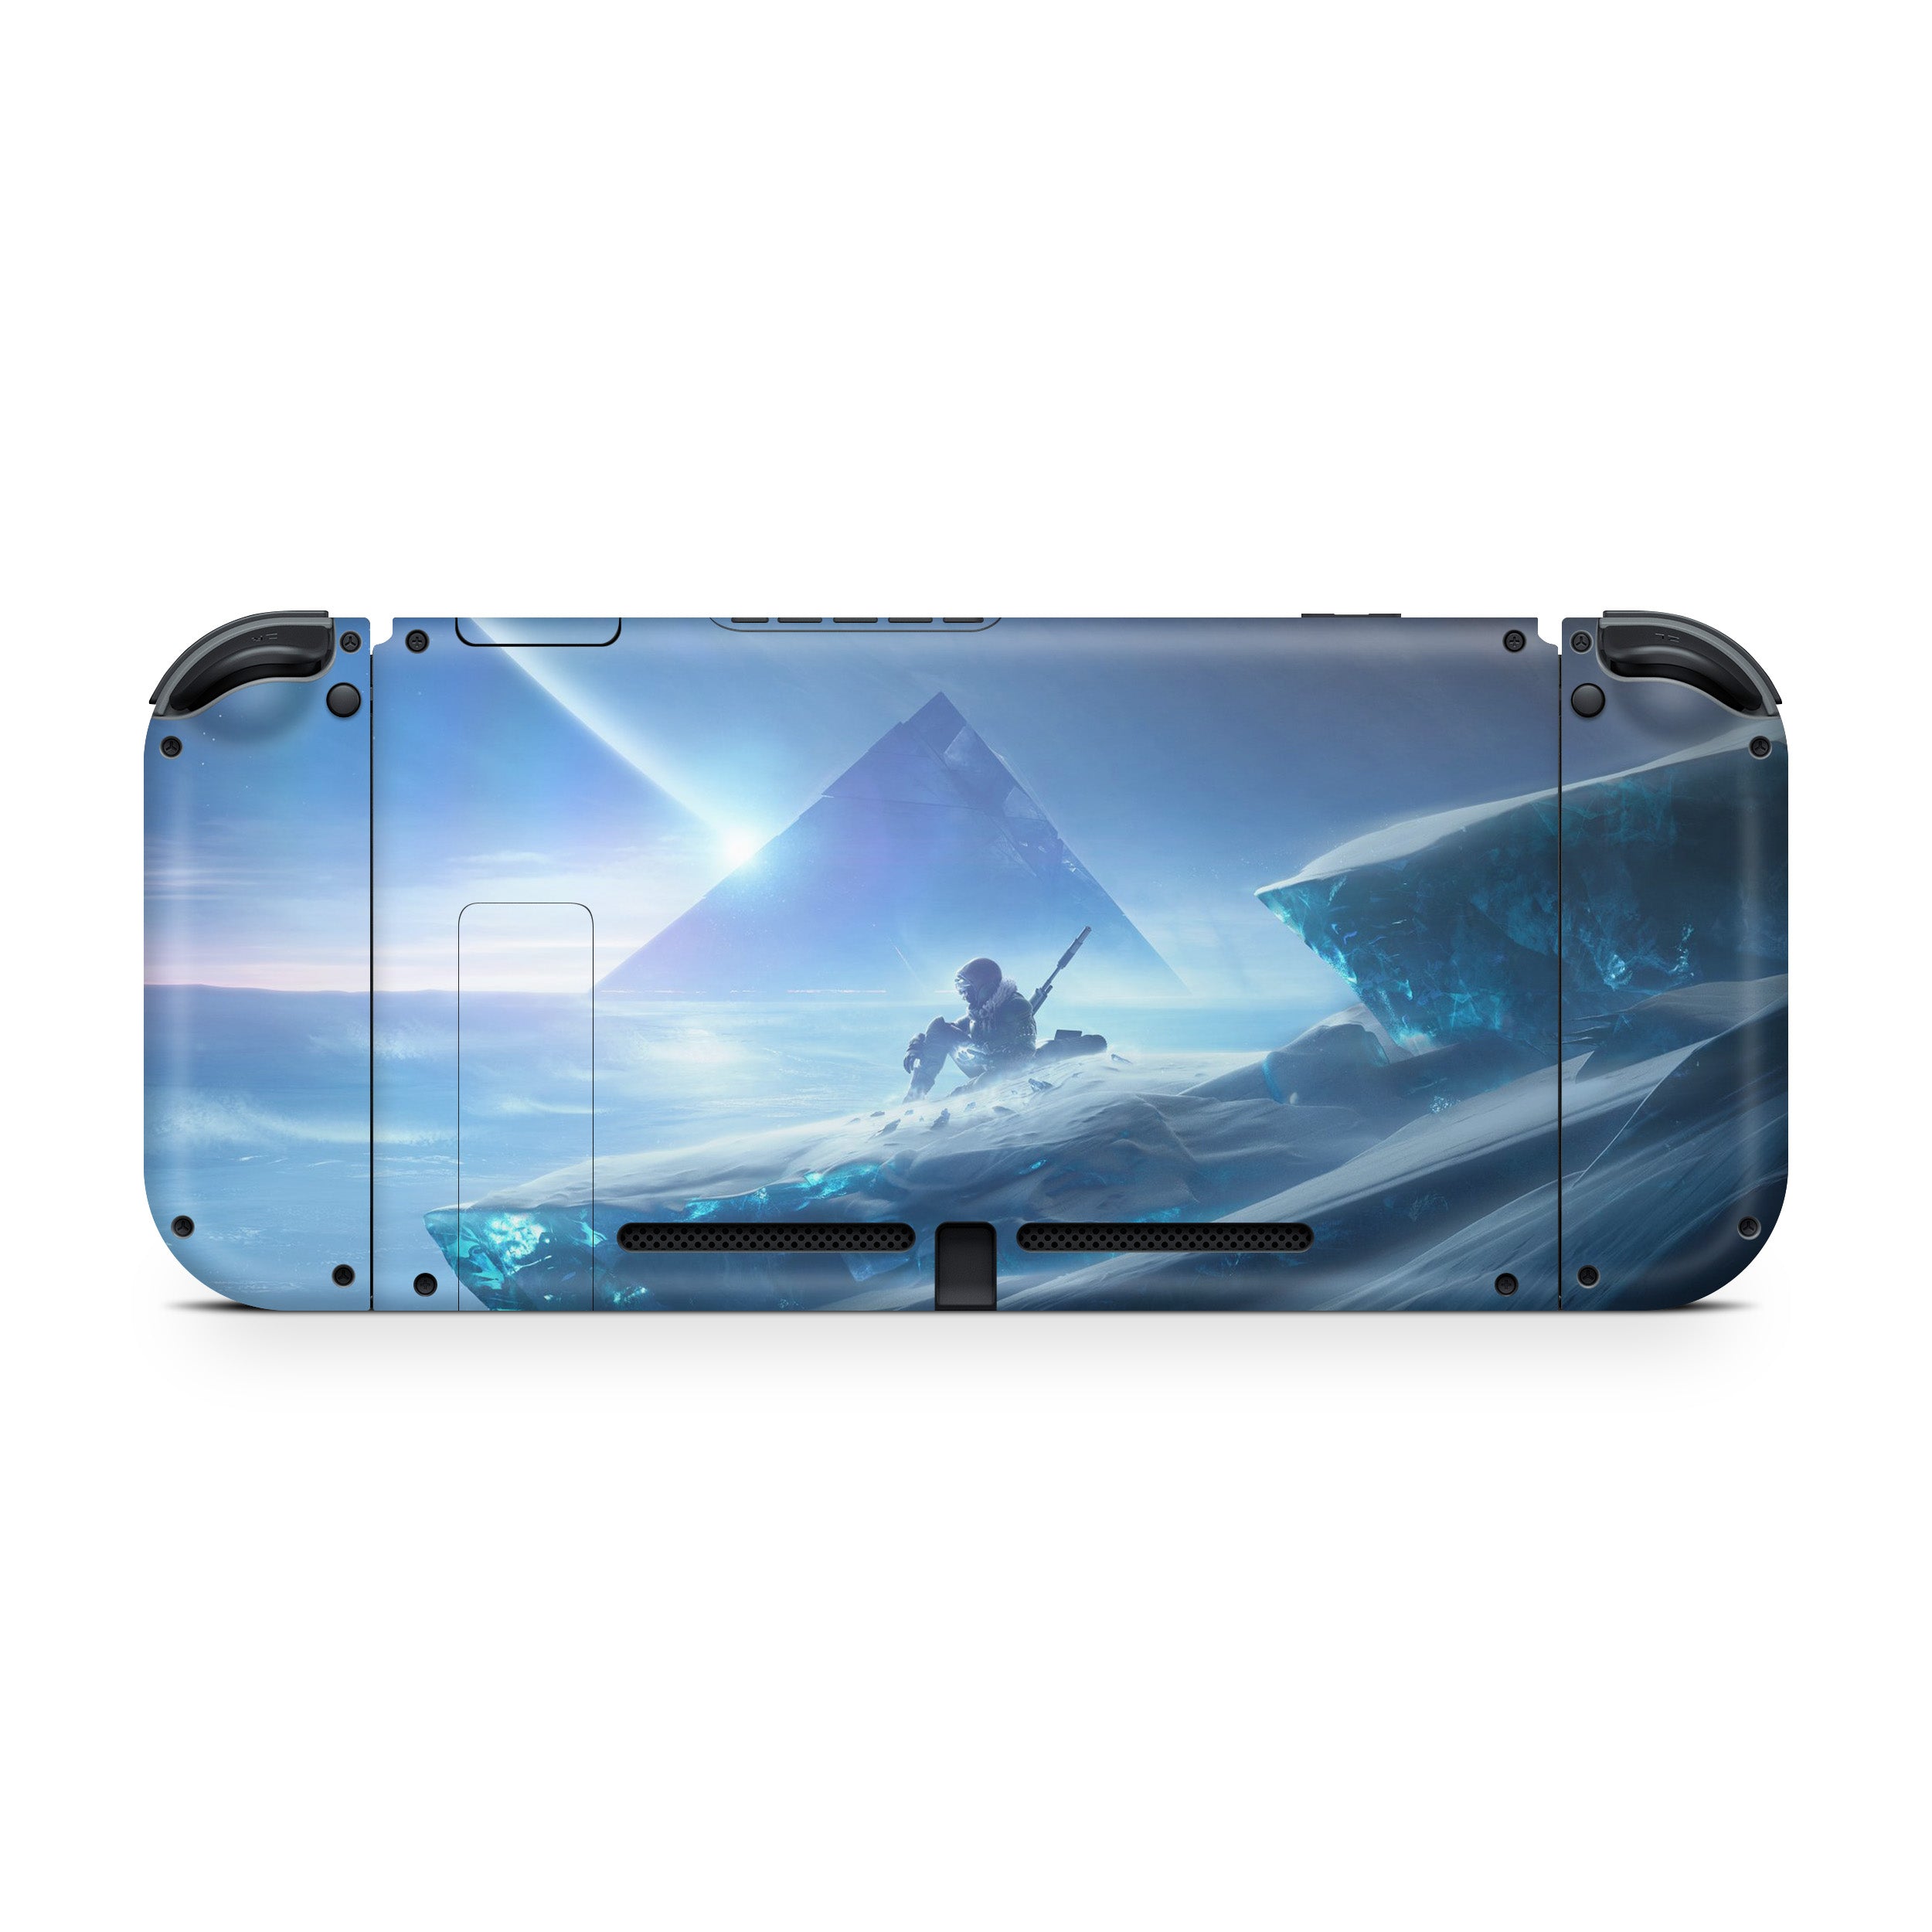 A video game skin featuring a Destiny 2 design for the Nintendo Switch.